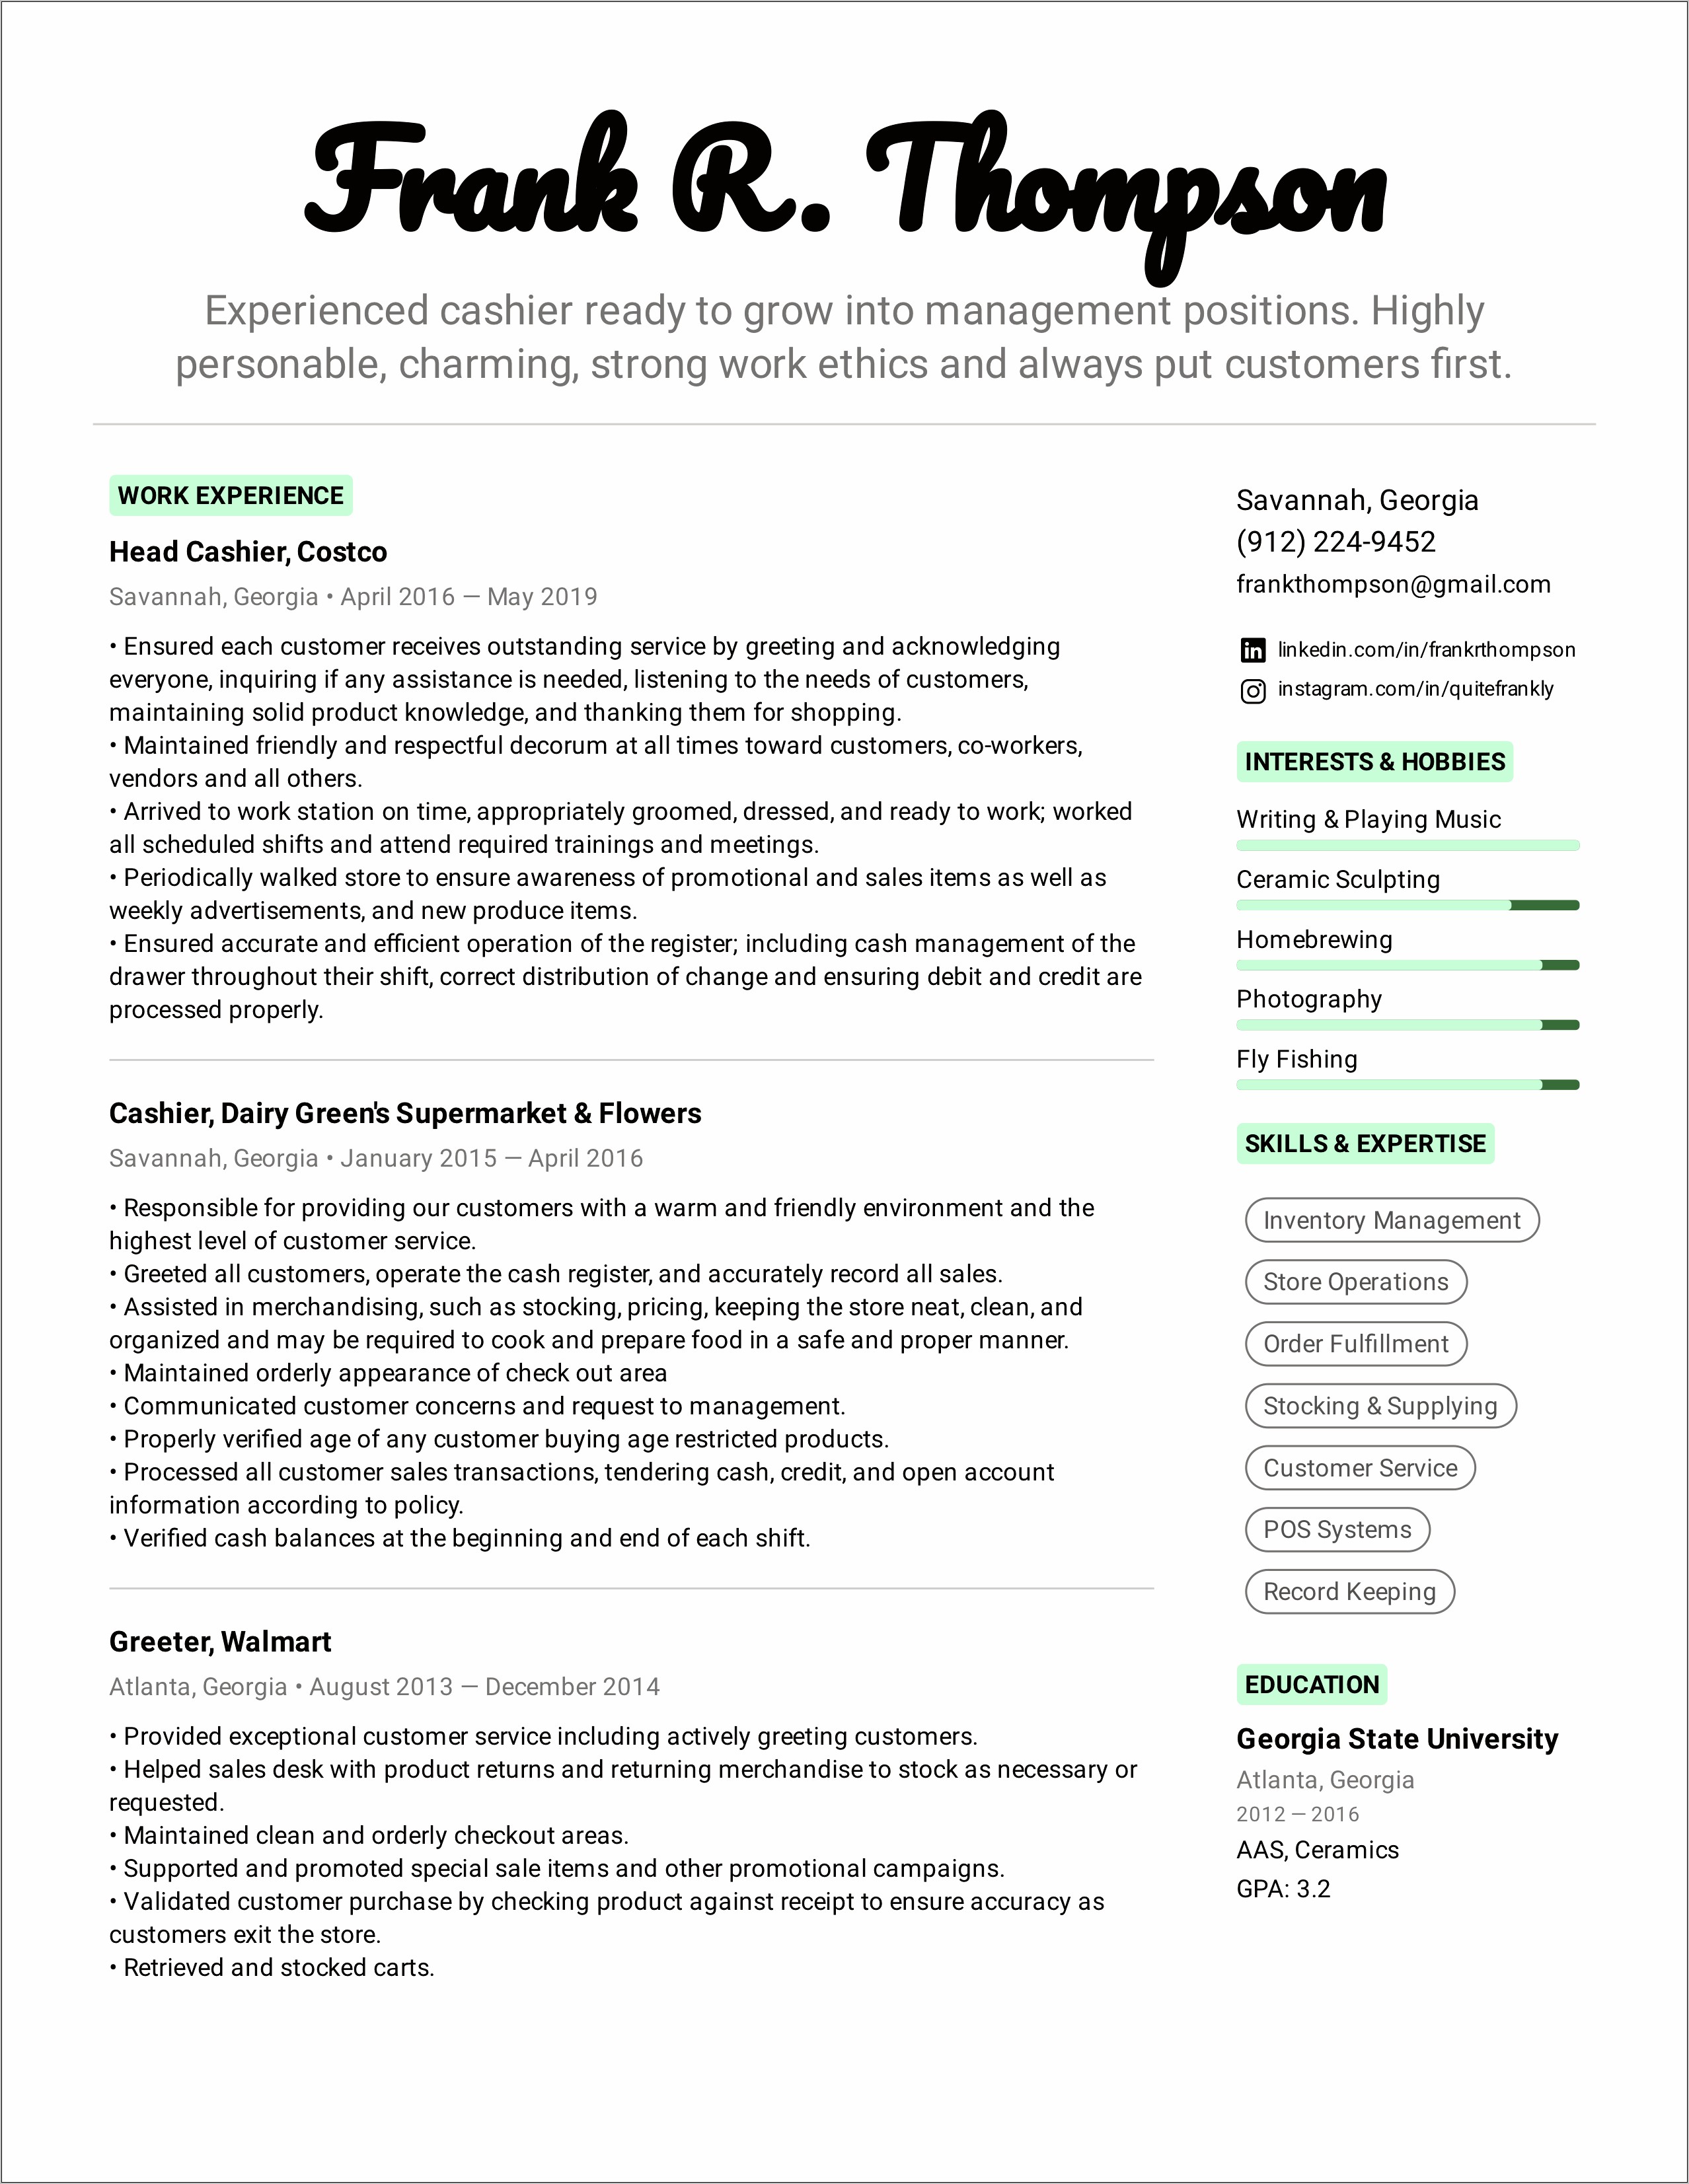 Free Resume Examples For Cashier